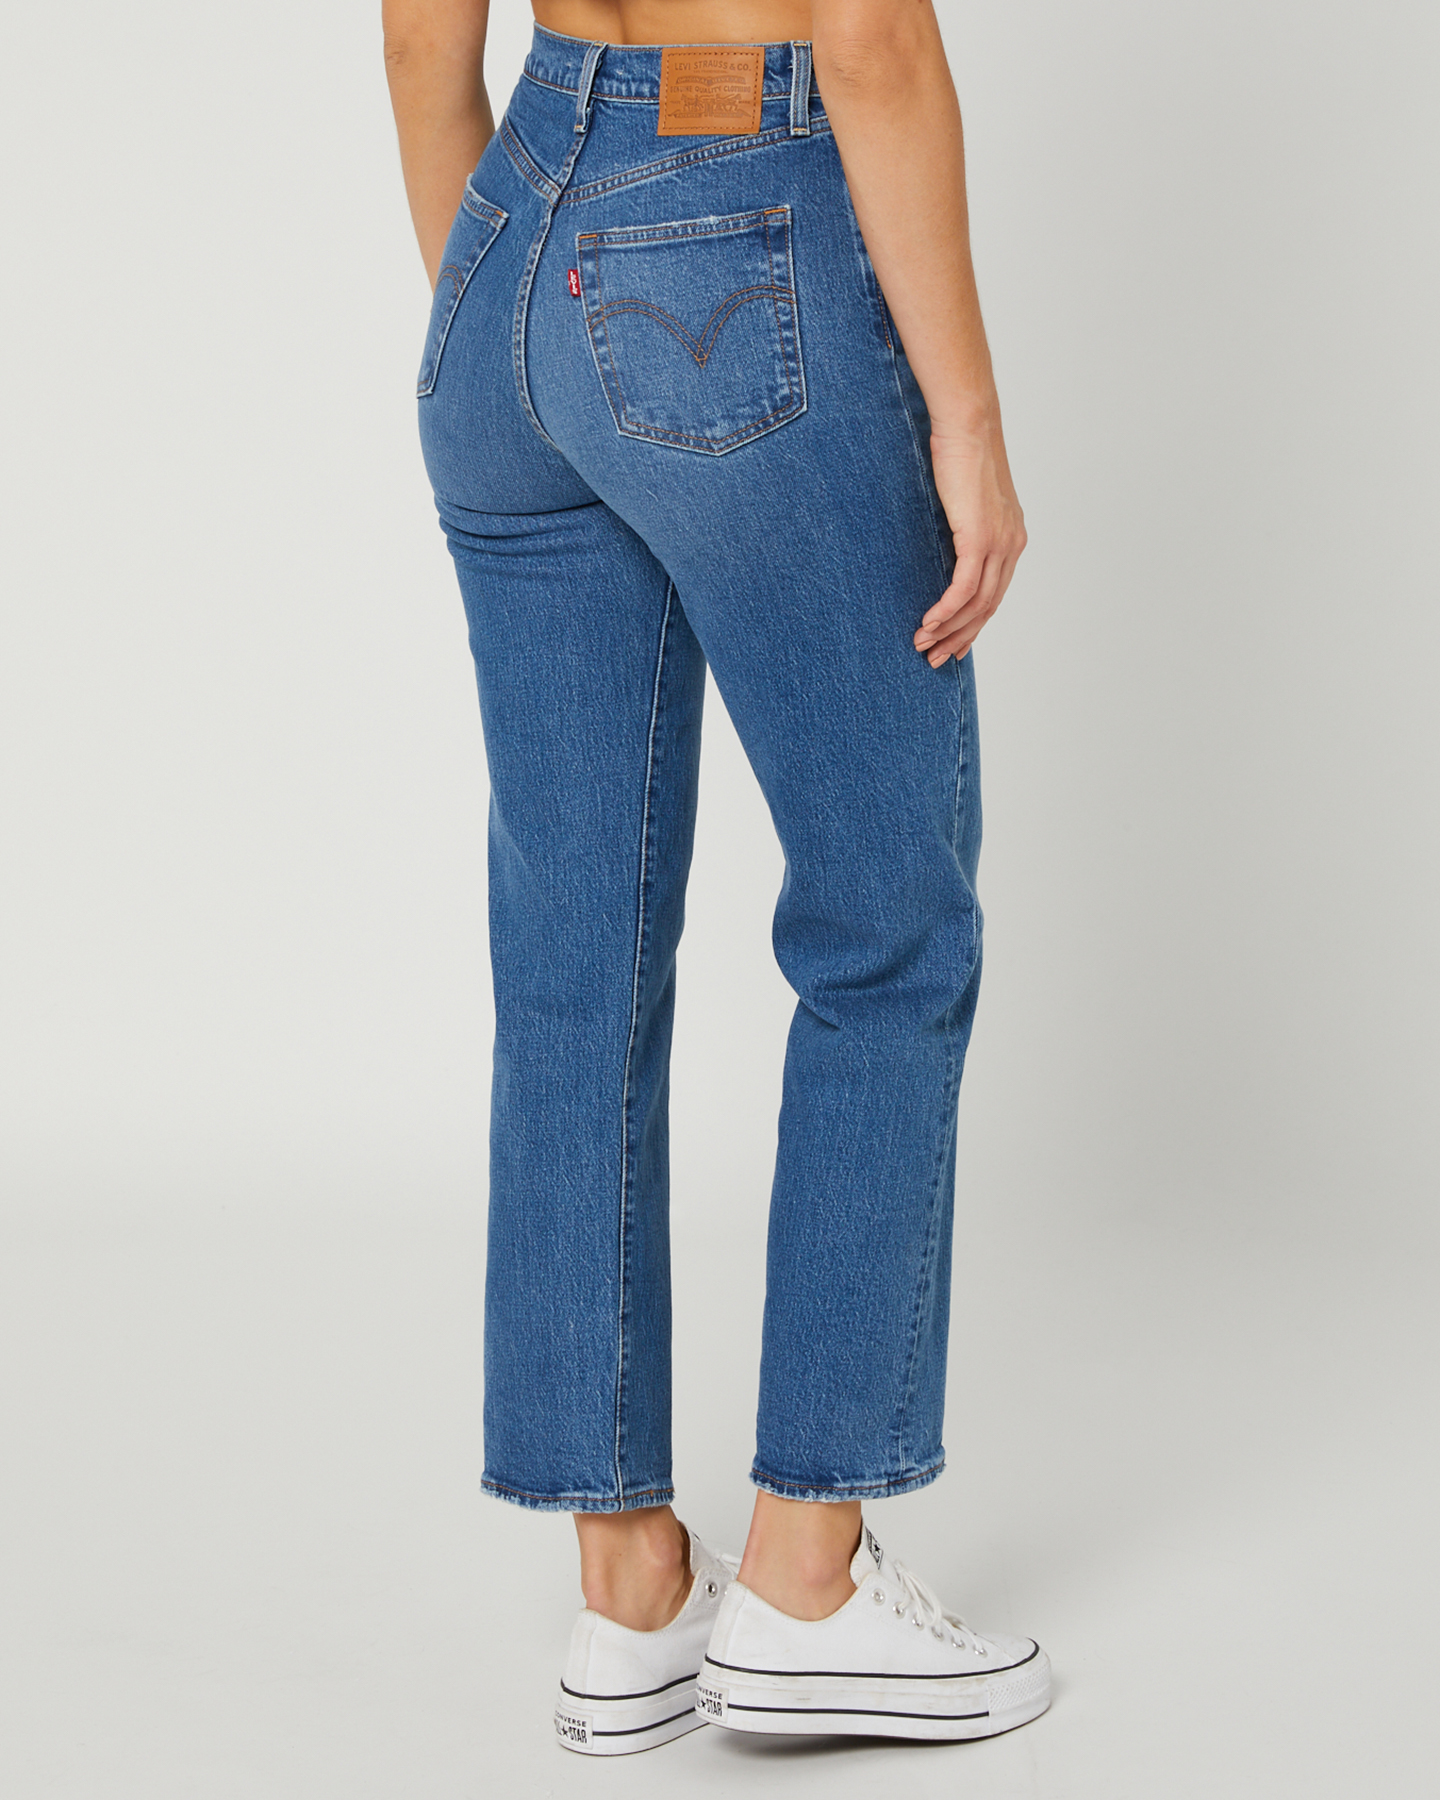 Levis Ribcage Straight Ankle Jean Jazz Jive Together Surfstitch